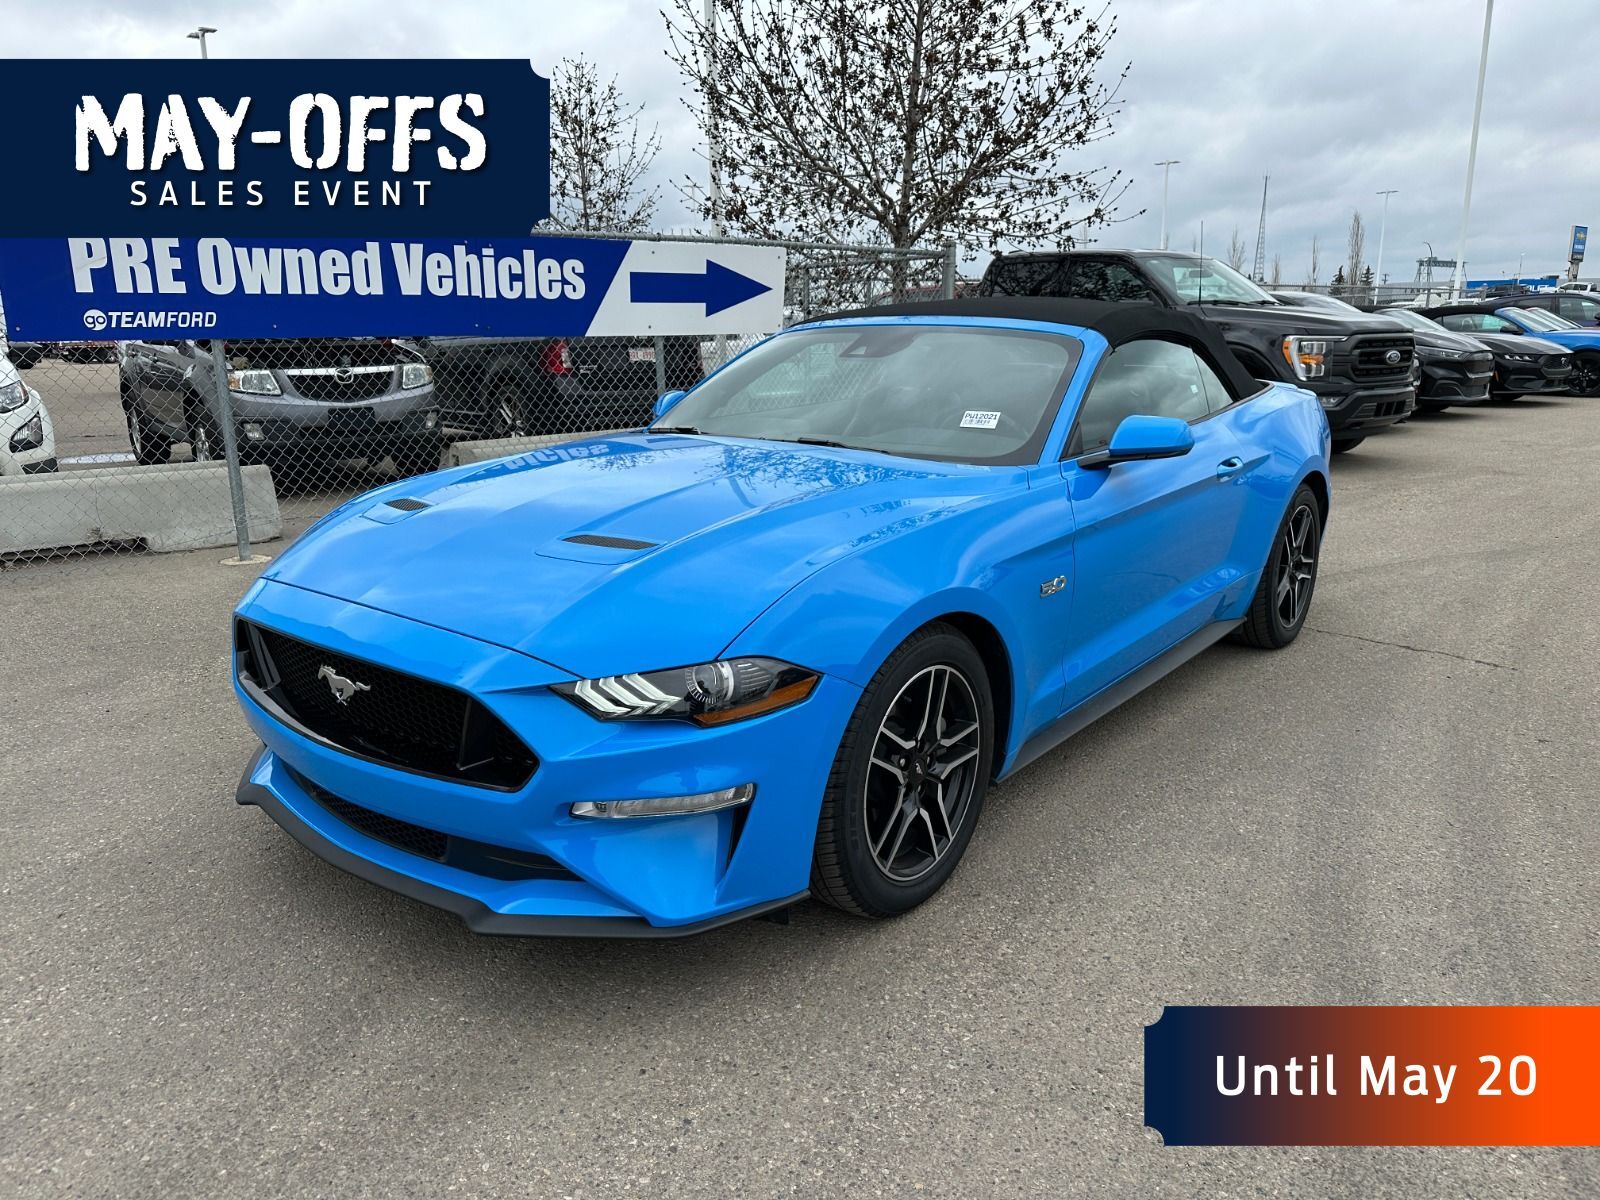 2023 Ford Mustang 5.0L V8 450HP, GT CONVERTIBLE PREMIUM, SECURITY PK